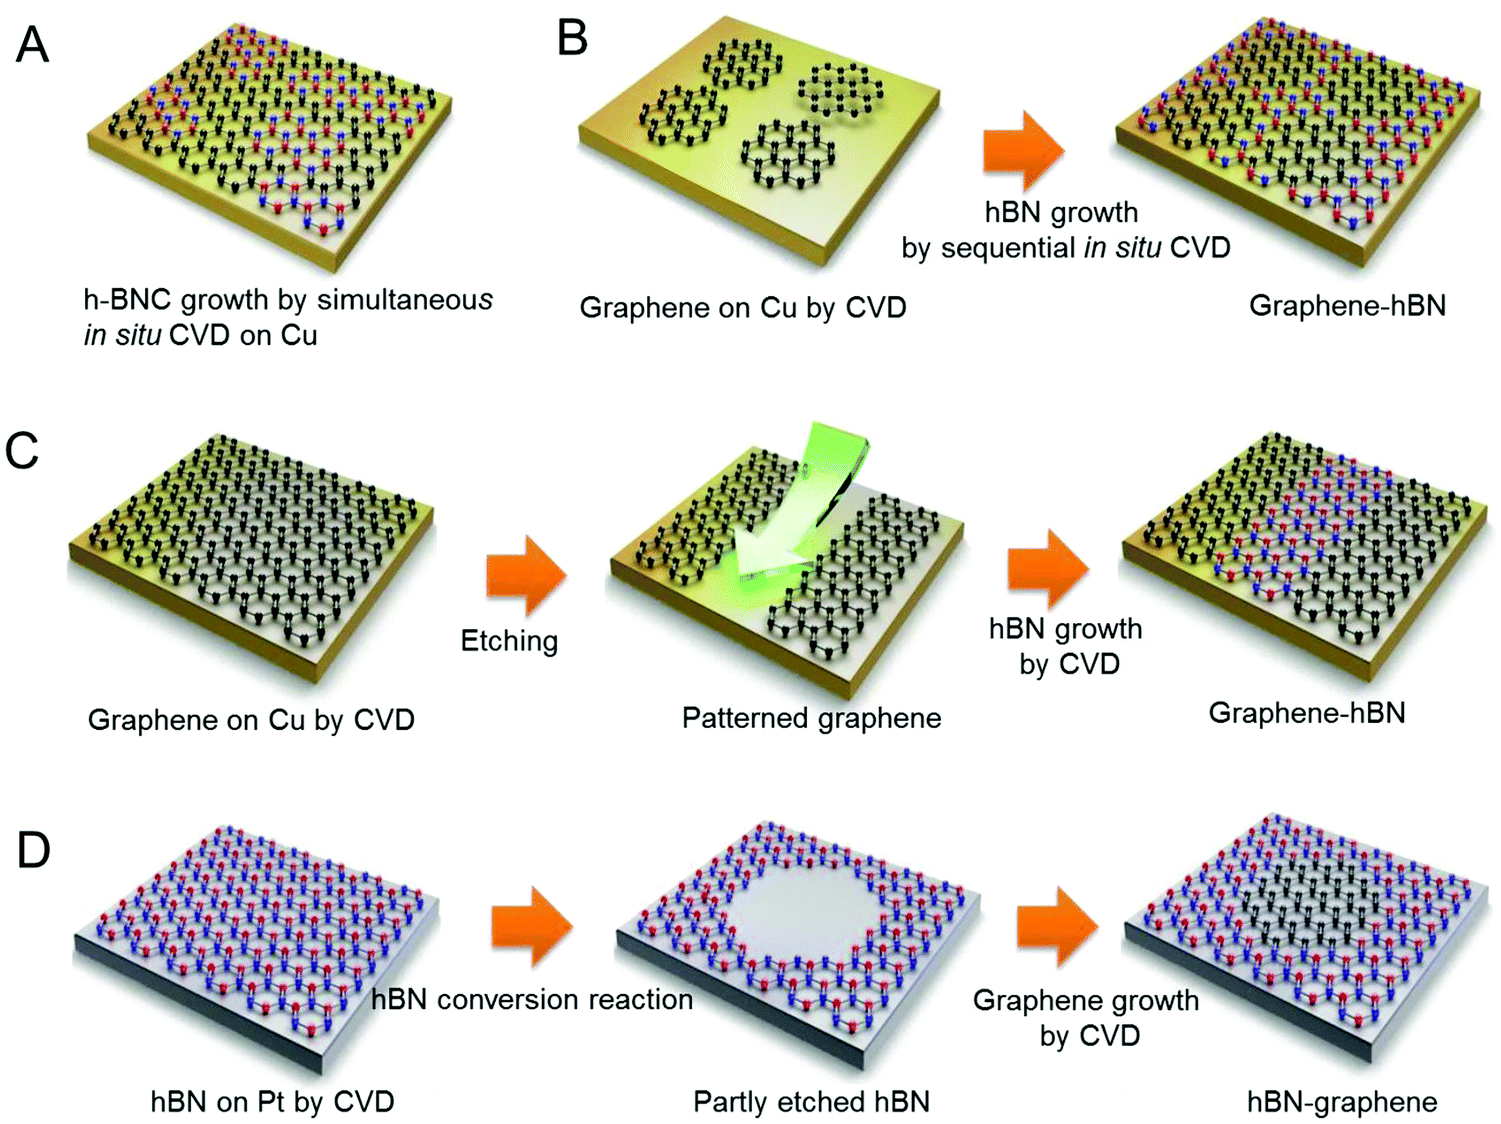 Nanomaterials: a review of synthesis methods, properties, recent progress,  and challenges - Materials Advances (RSC Publishing) DOI:10.1039/D0MA00807A